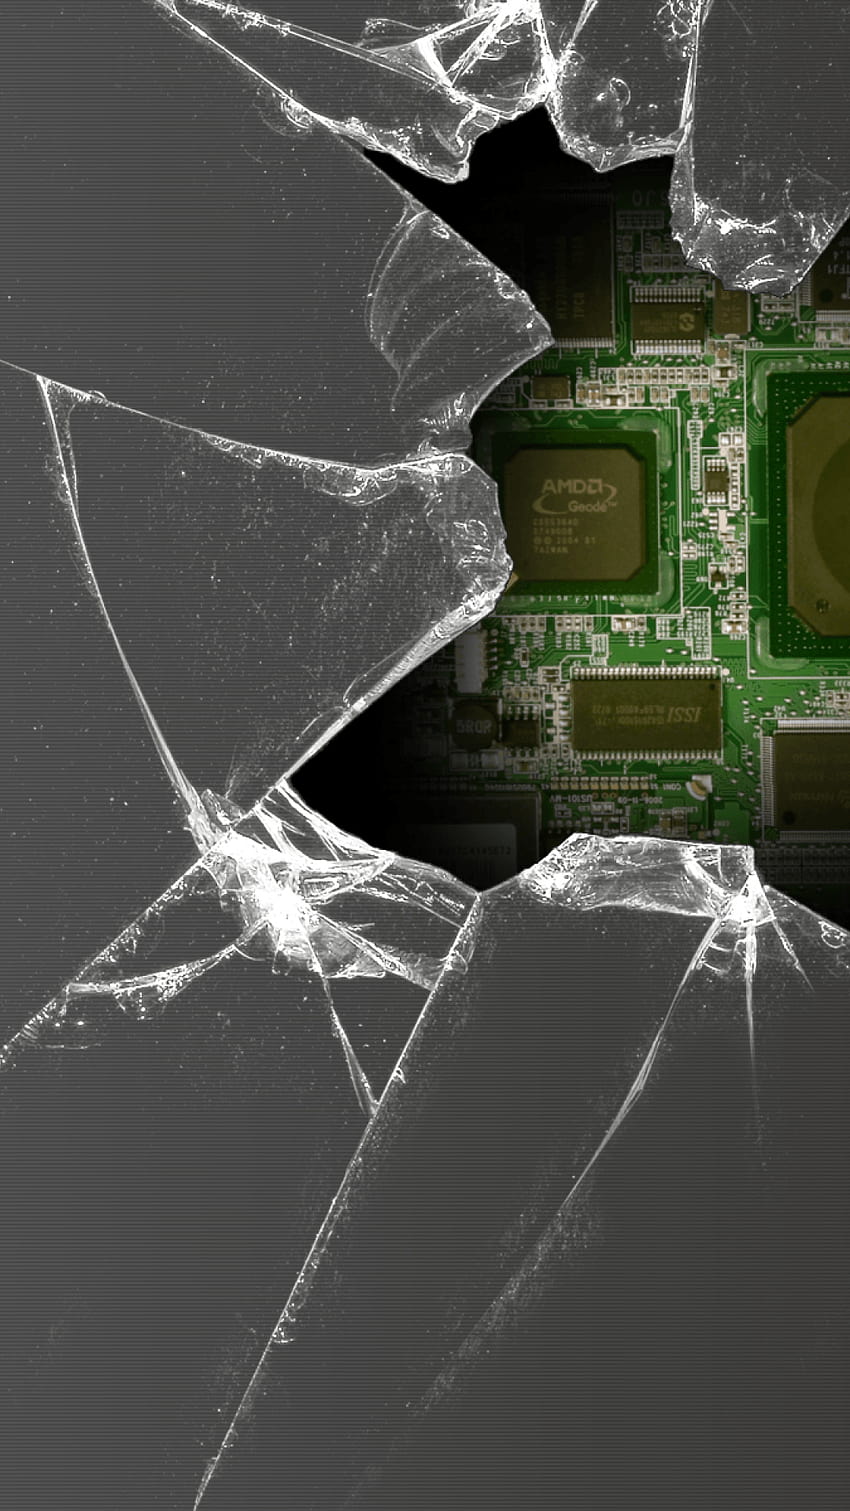 1320 broken screen wallpaper cracked screen prank for iPhone iPad  750x1334  Android  iPhone HD Wallpaper Background Download HD Wallpapers  Desktop Background  Android  iPhone 1080p 4k 1080x1921 2023